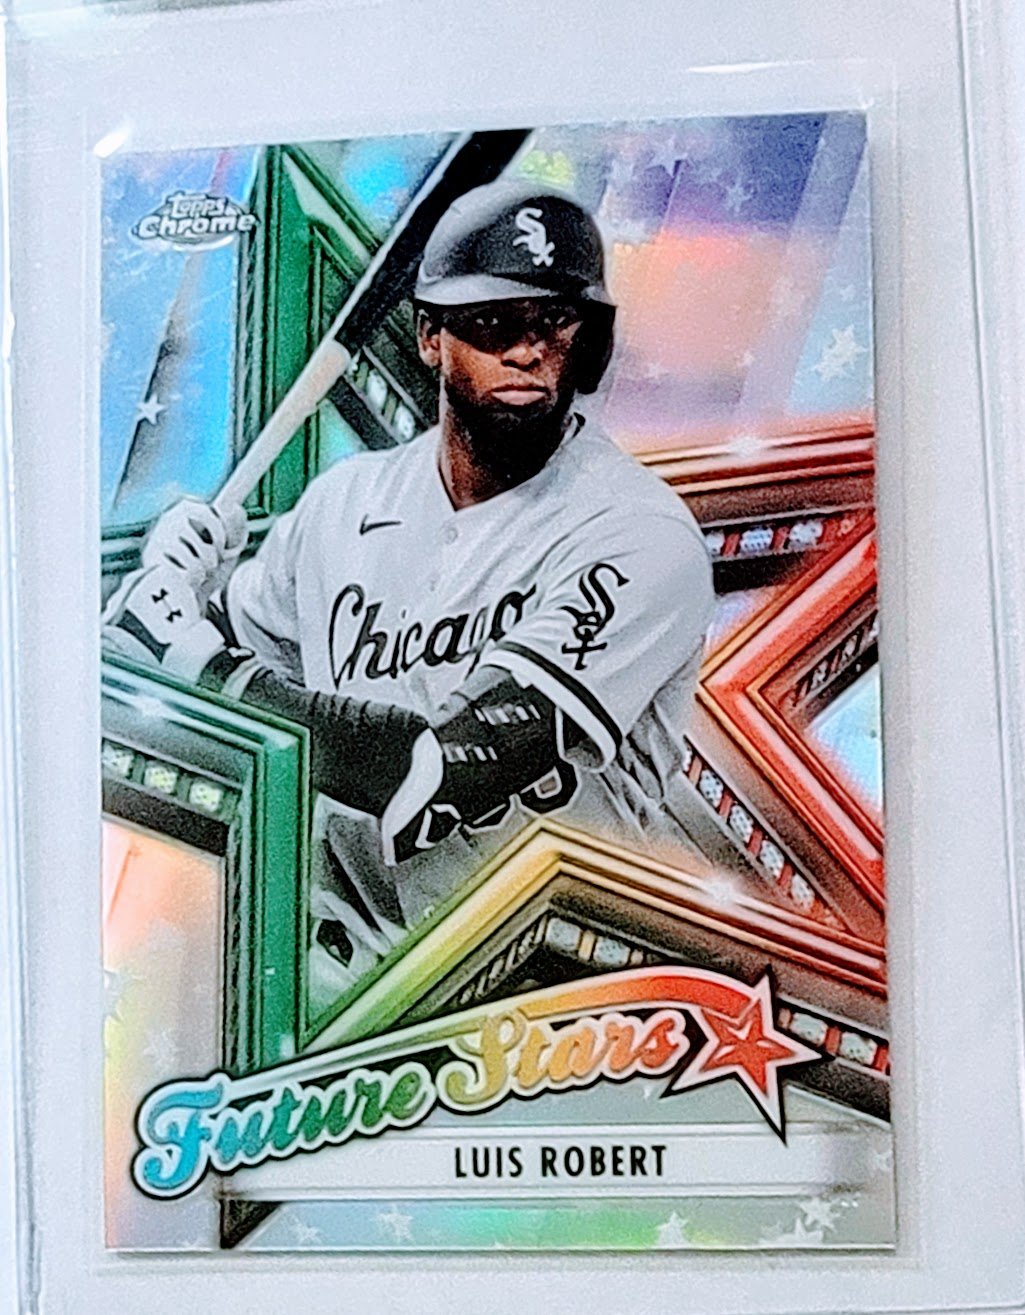 2021 Topps Chrome Luis Robert Future Stars Refractor Baseball Card TPTV simple Xclusive Collectibles   